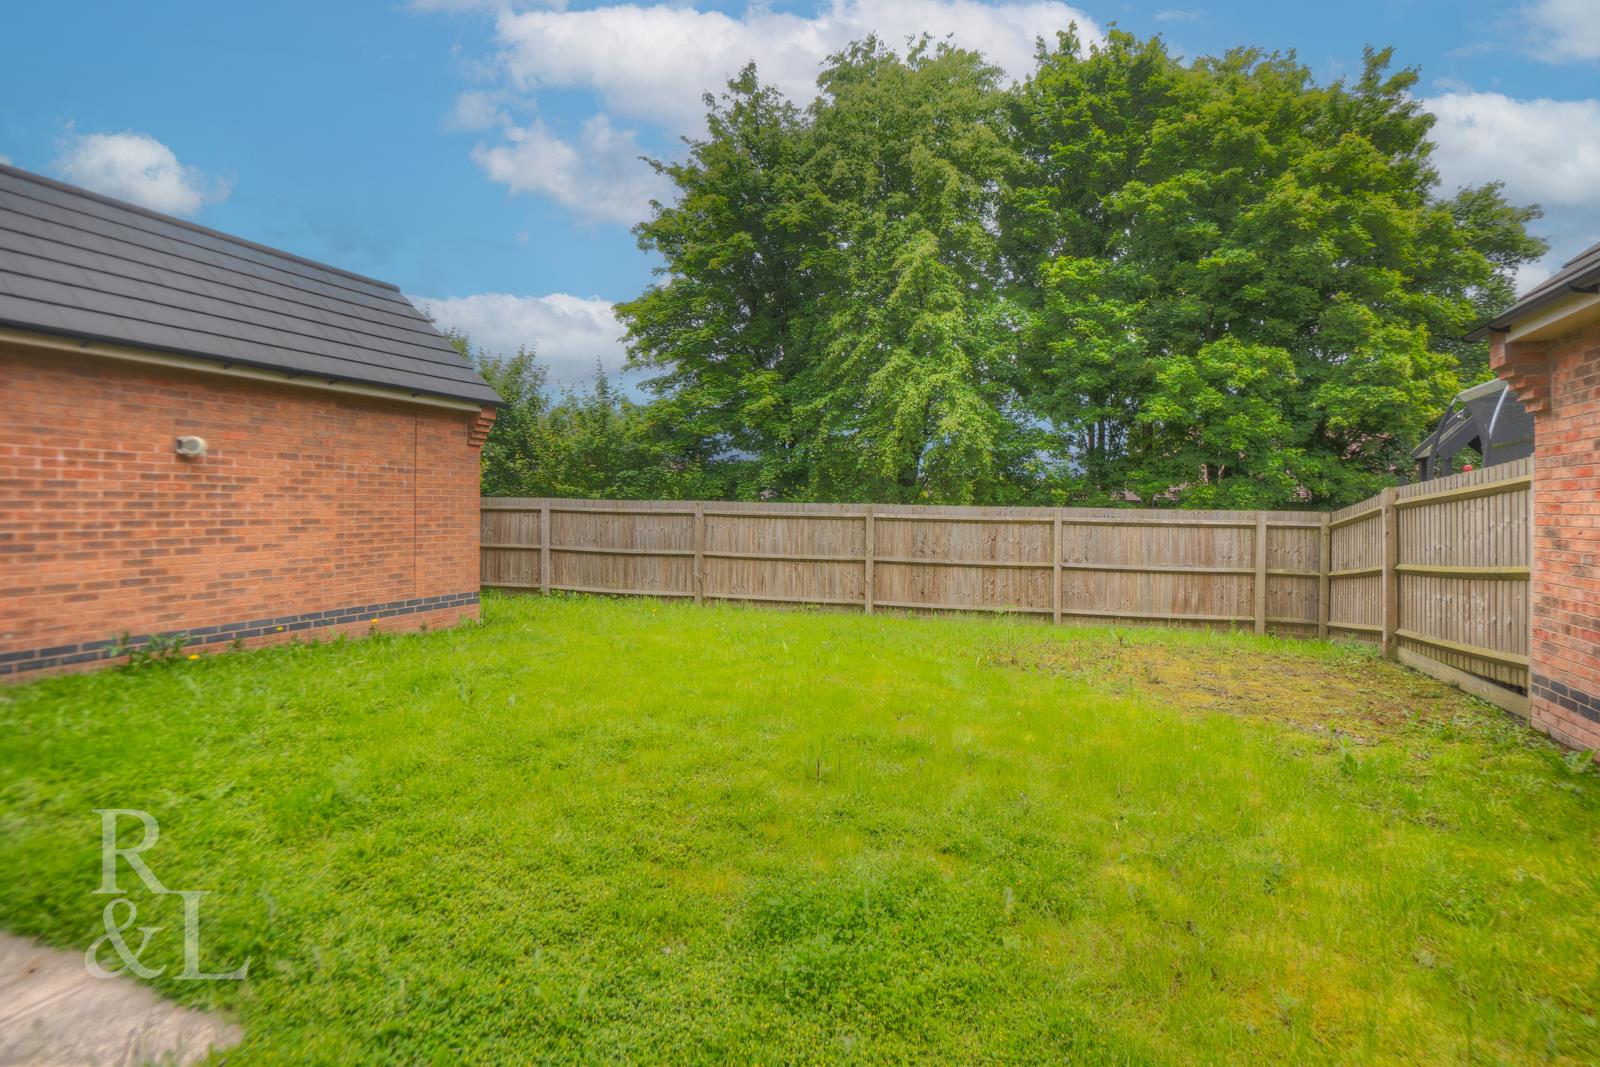 Property image for Pickering Drive, Blackfordby